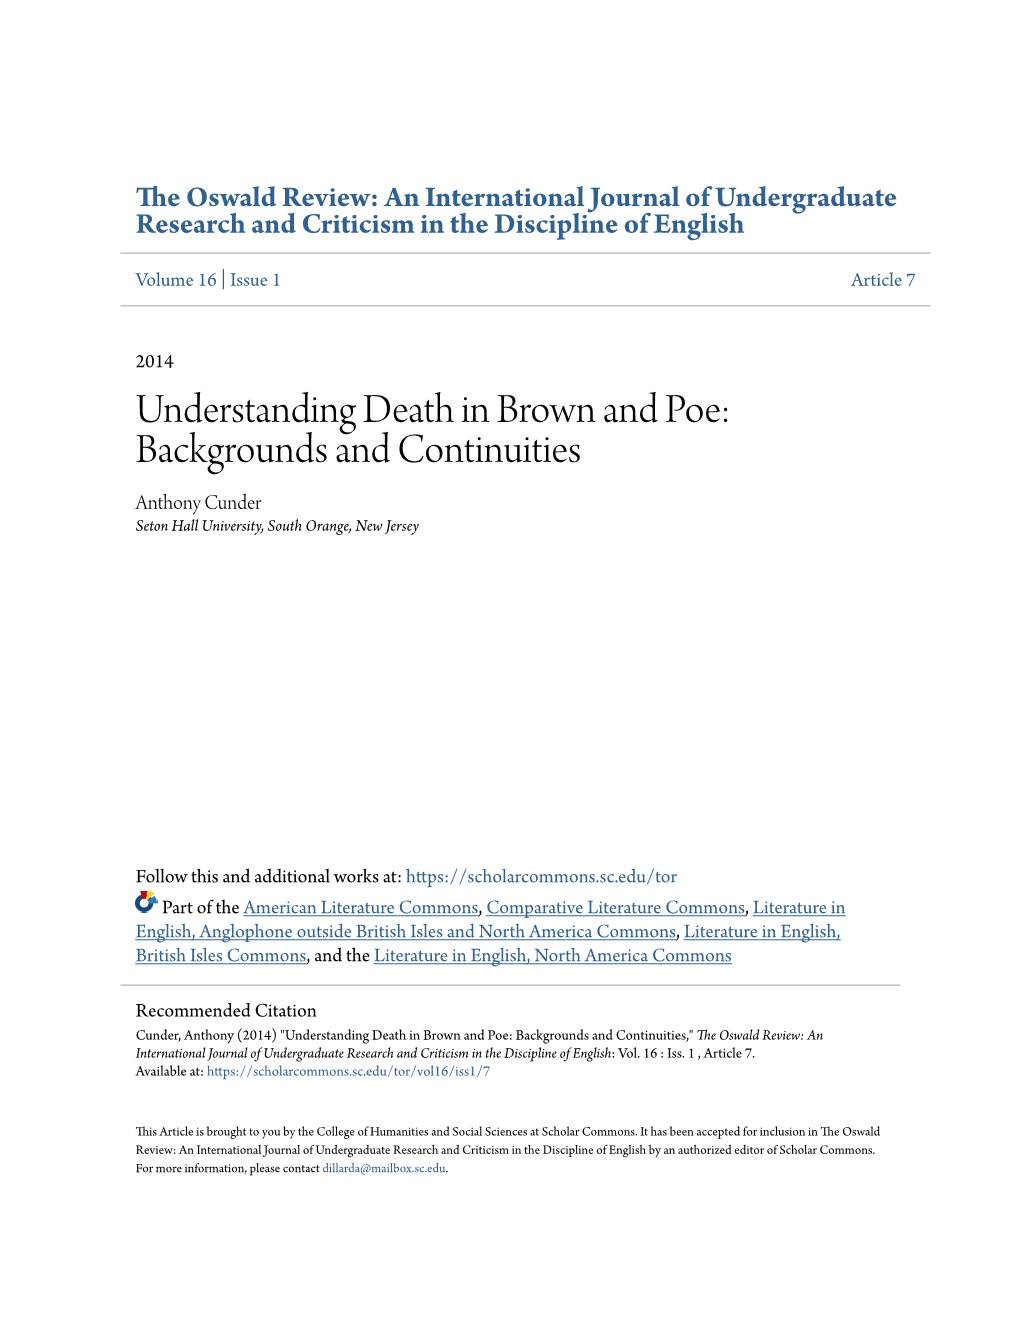 Understanding Death in Brown and Poe: Backgrounds and Continuities Anthony Cunder Seton Hall University, South Orange, New Jersey